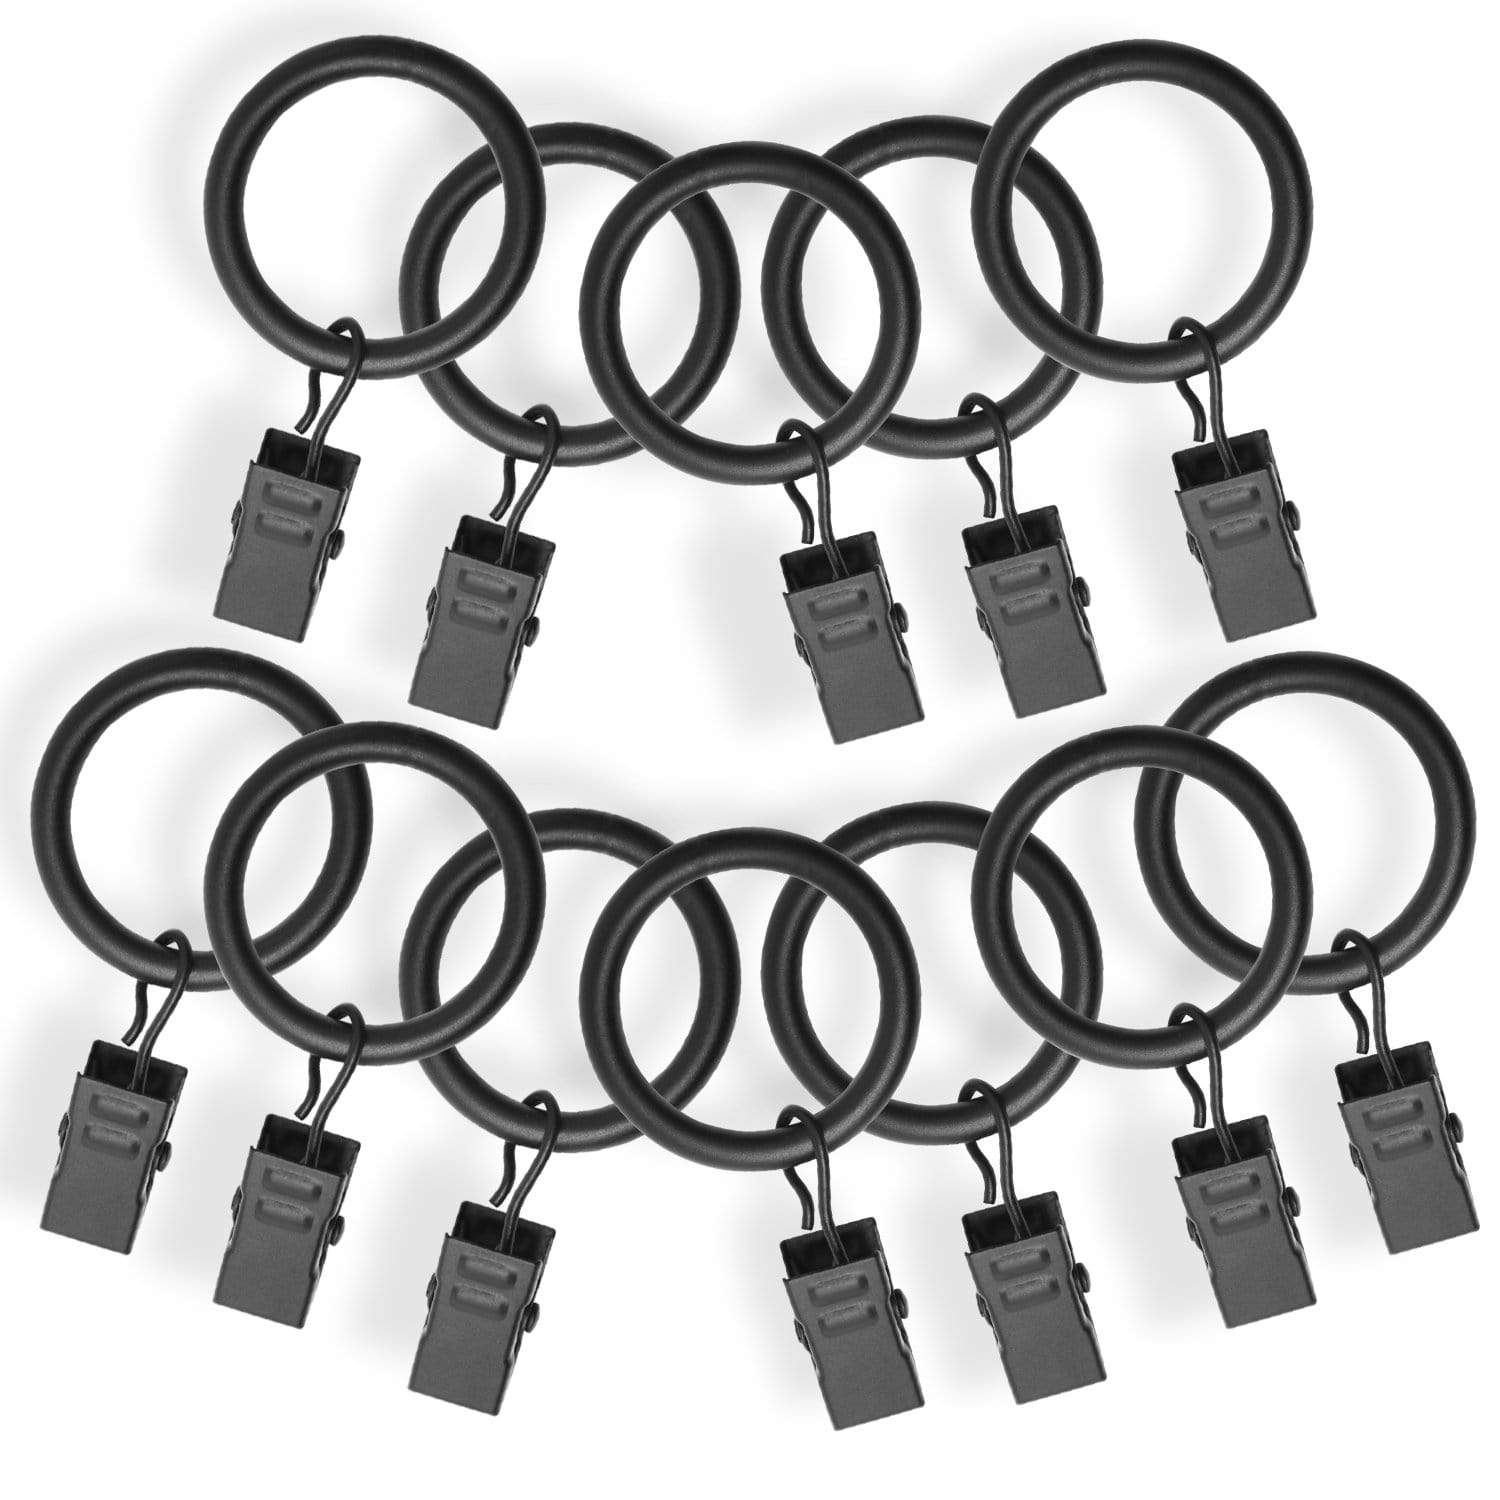 12 Pack of 3 Inch Valance Clips for Window Blinds